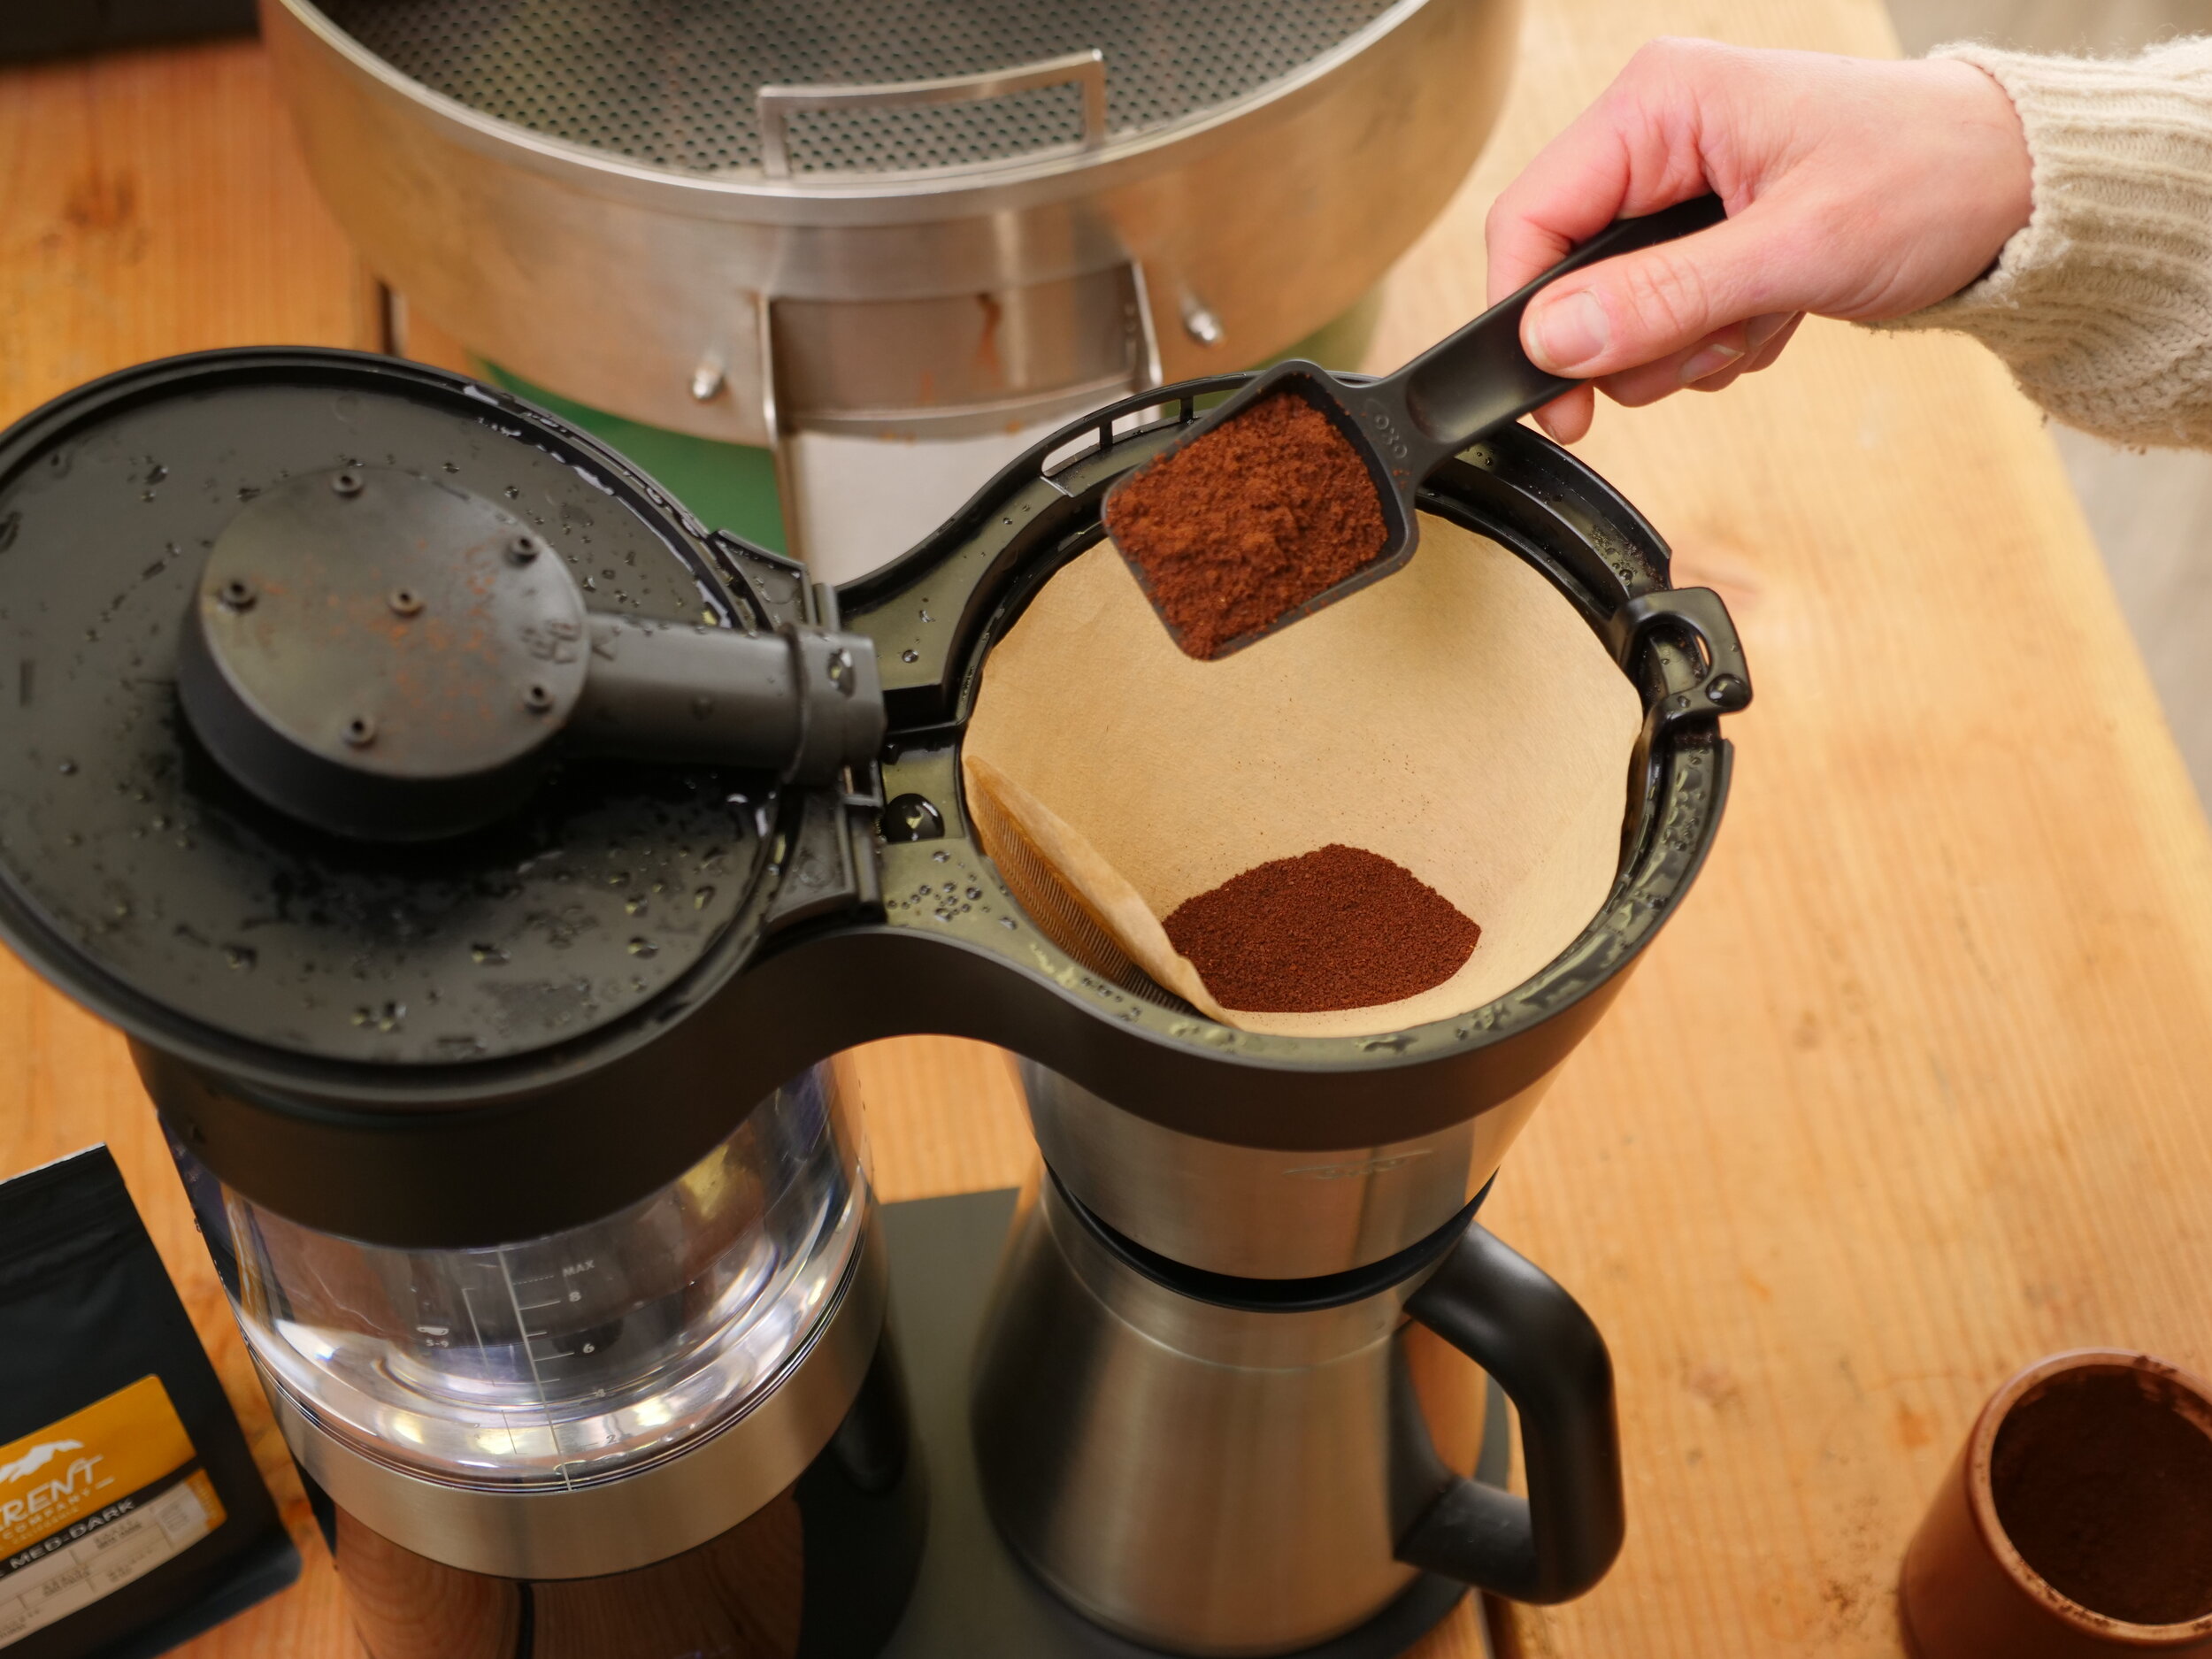 How to use a home coffee maker (seriously!) — Reverent Coffee Company